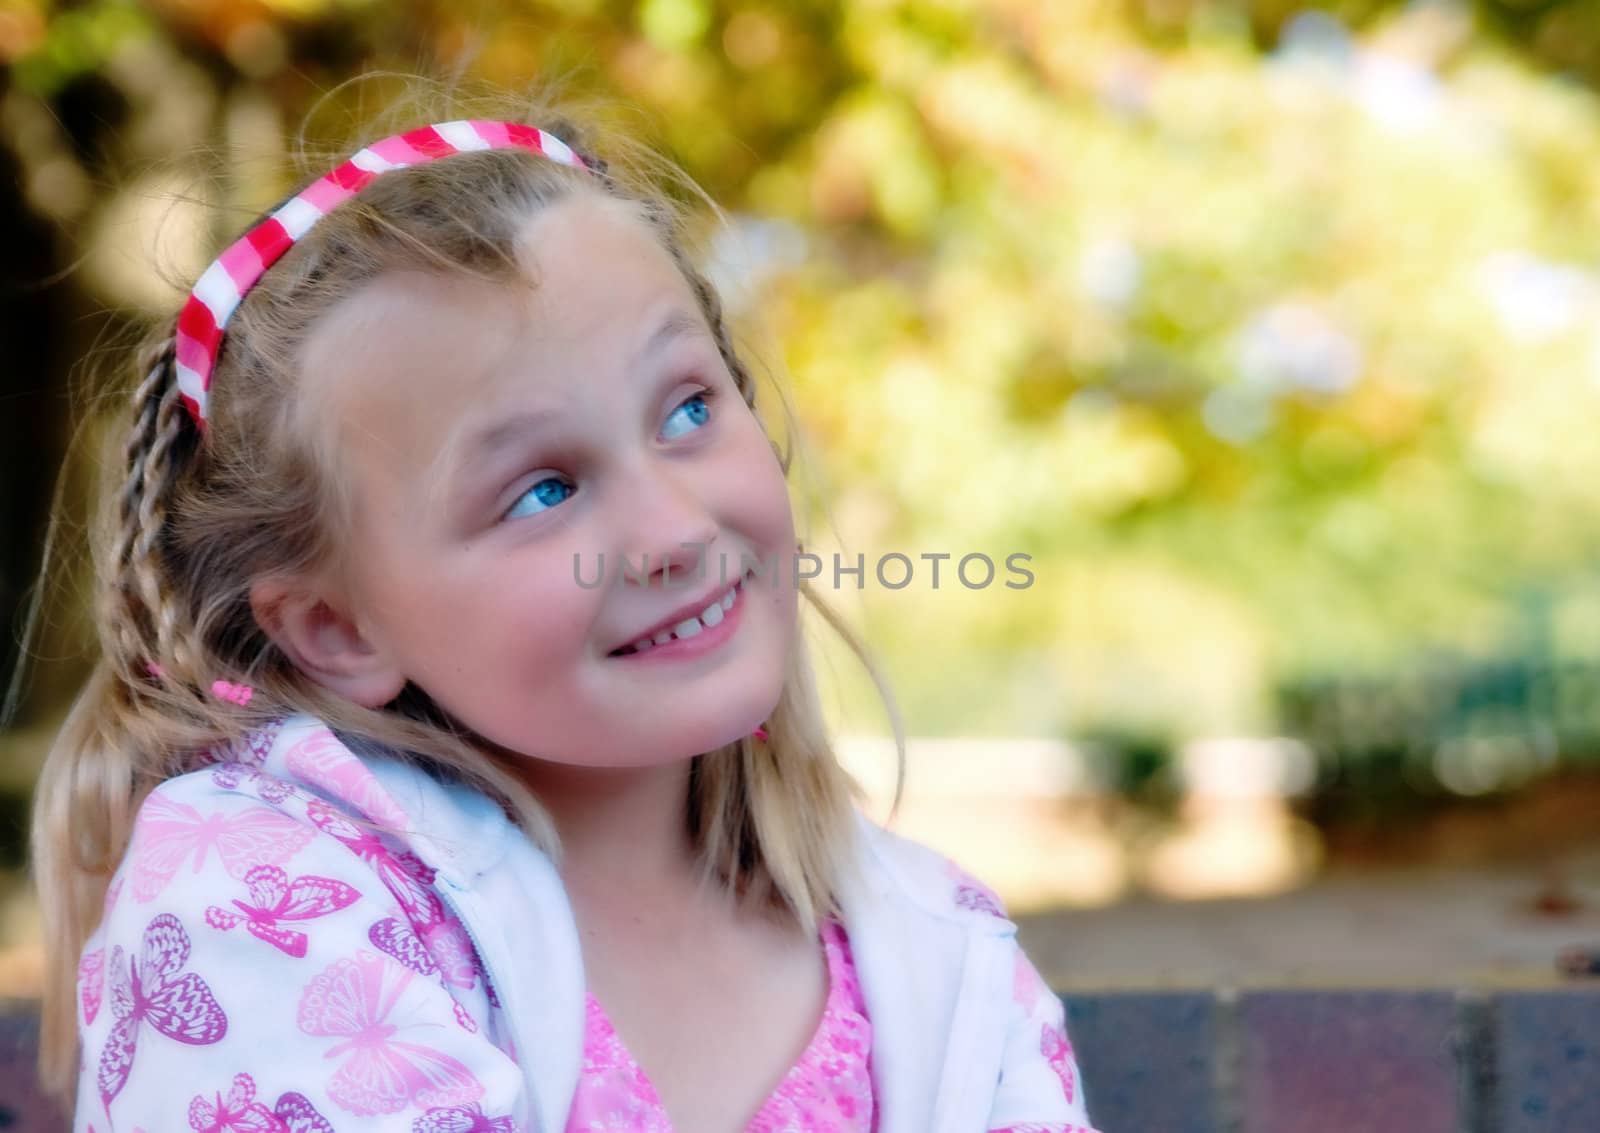 soft and dreamy focus image of a young girl wistful and waiting